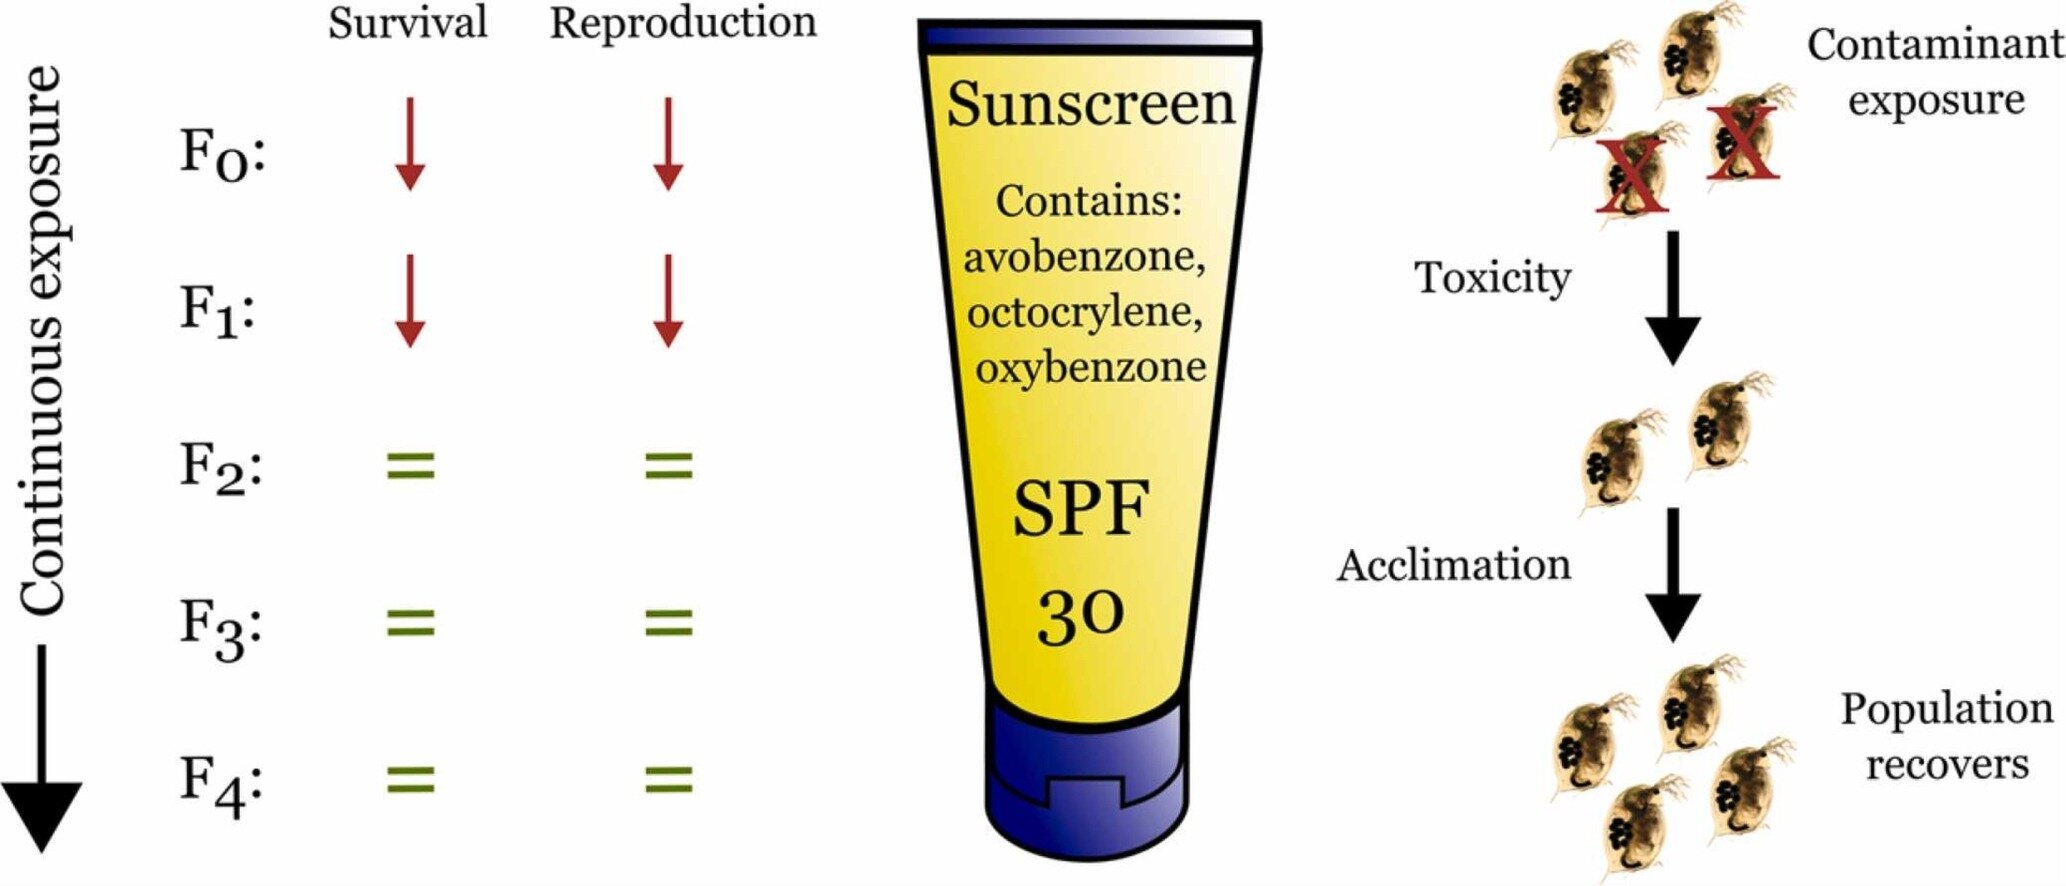 photo of Long-term study shows water fleas adapt to sunscreen ingredients image